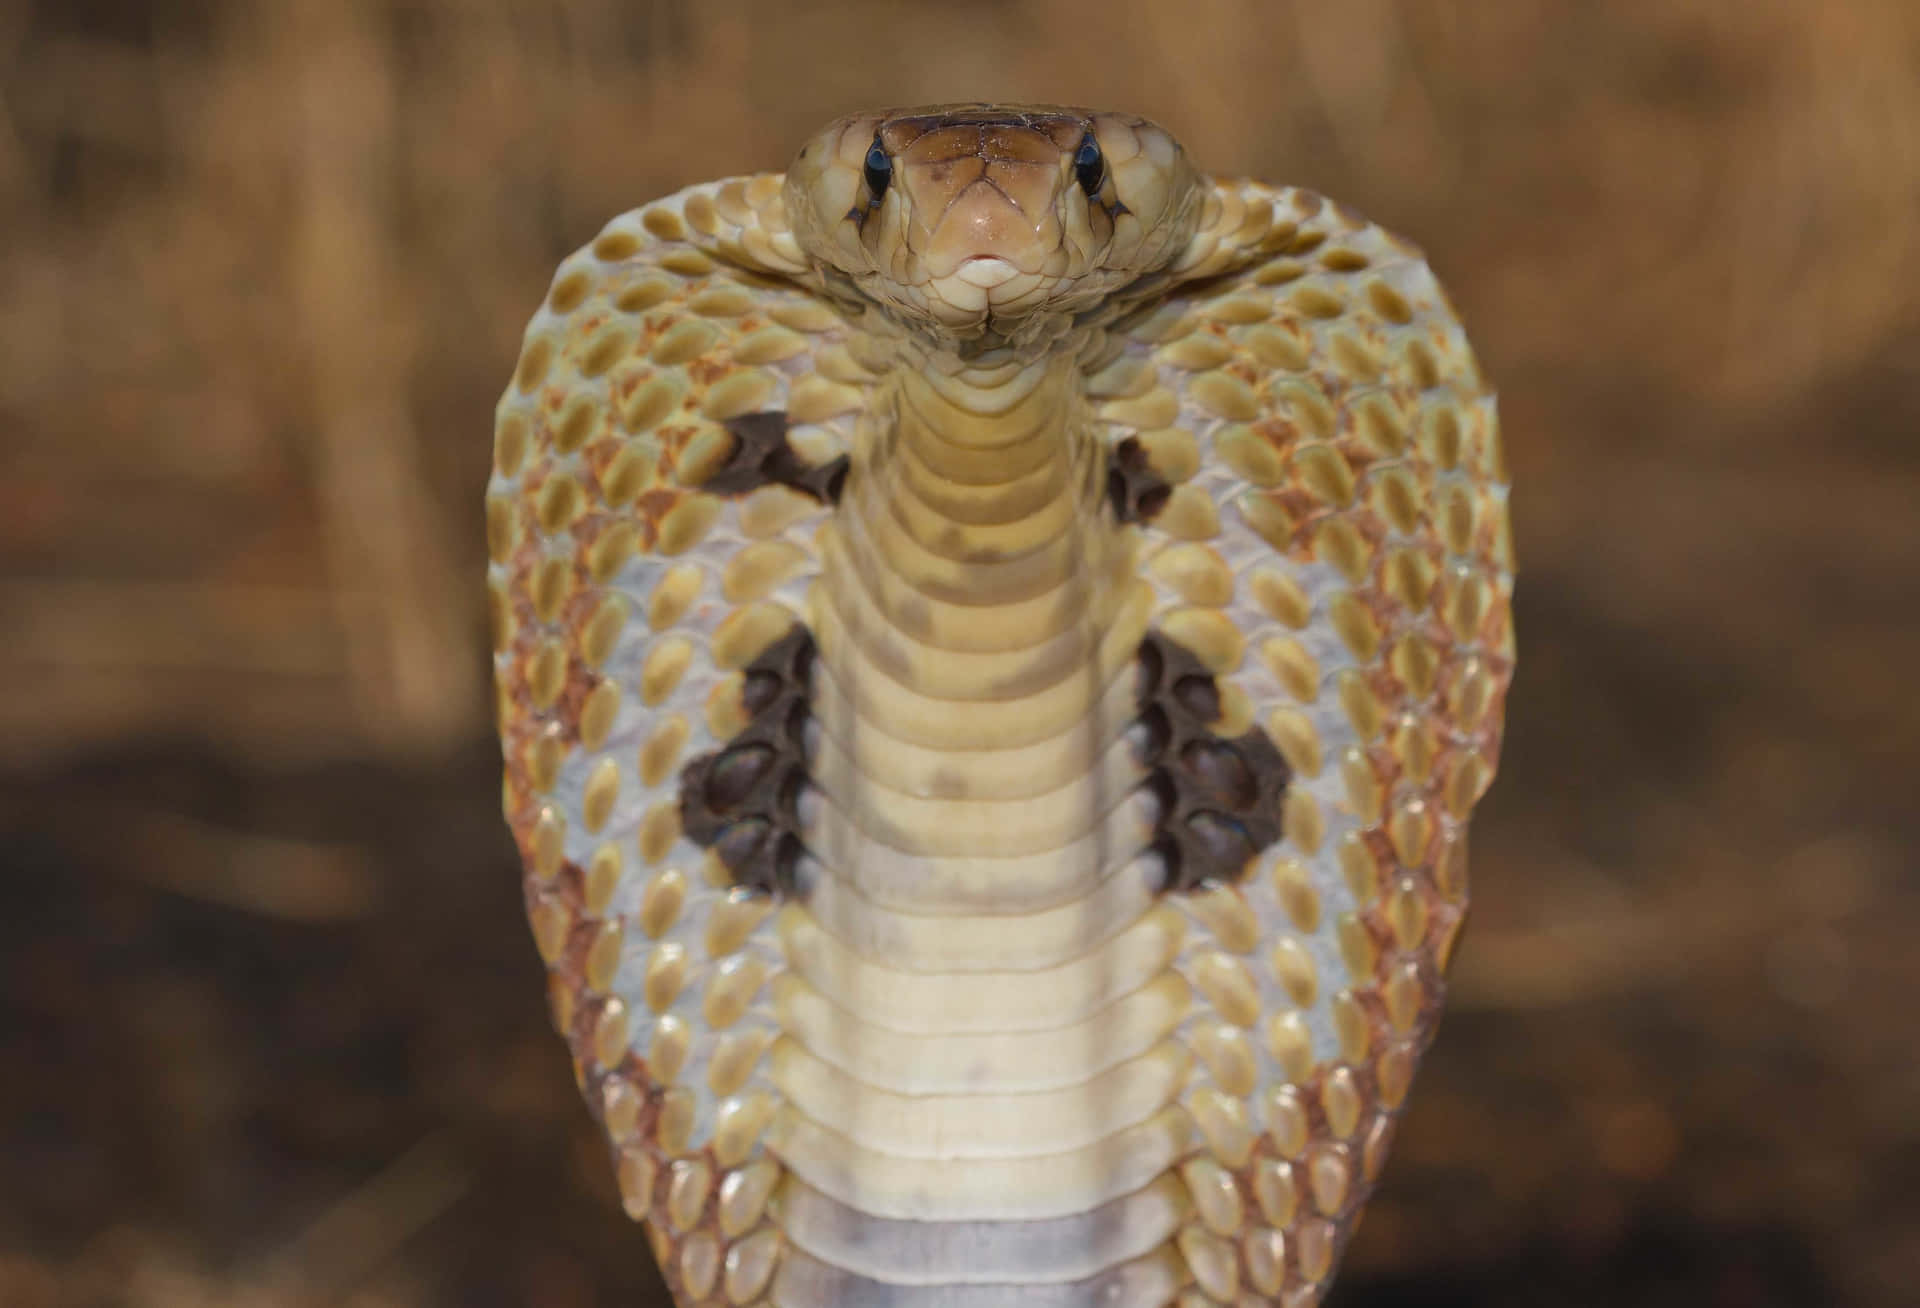 A Close Up Of A Cobra With Its Head Up